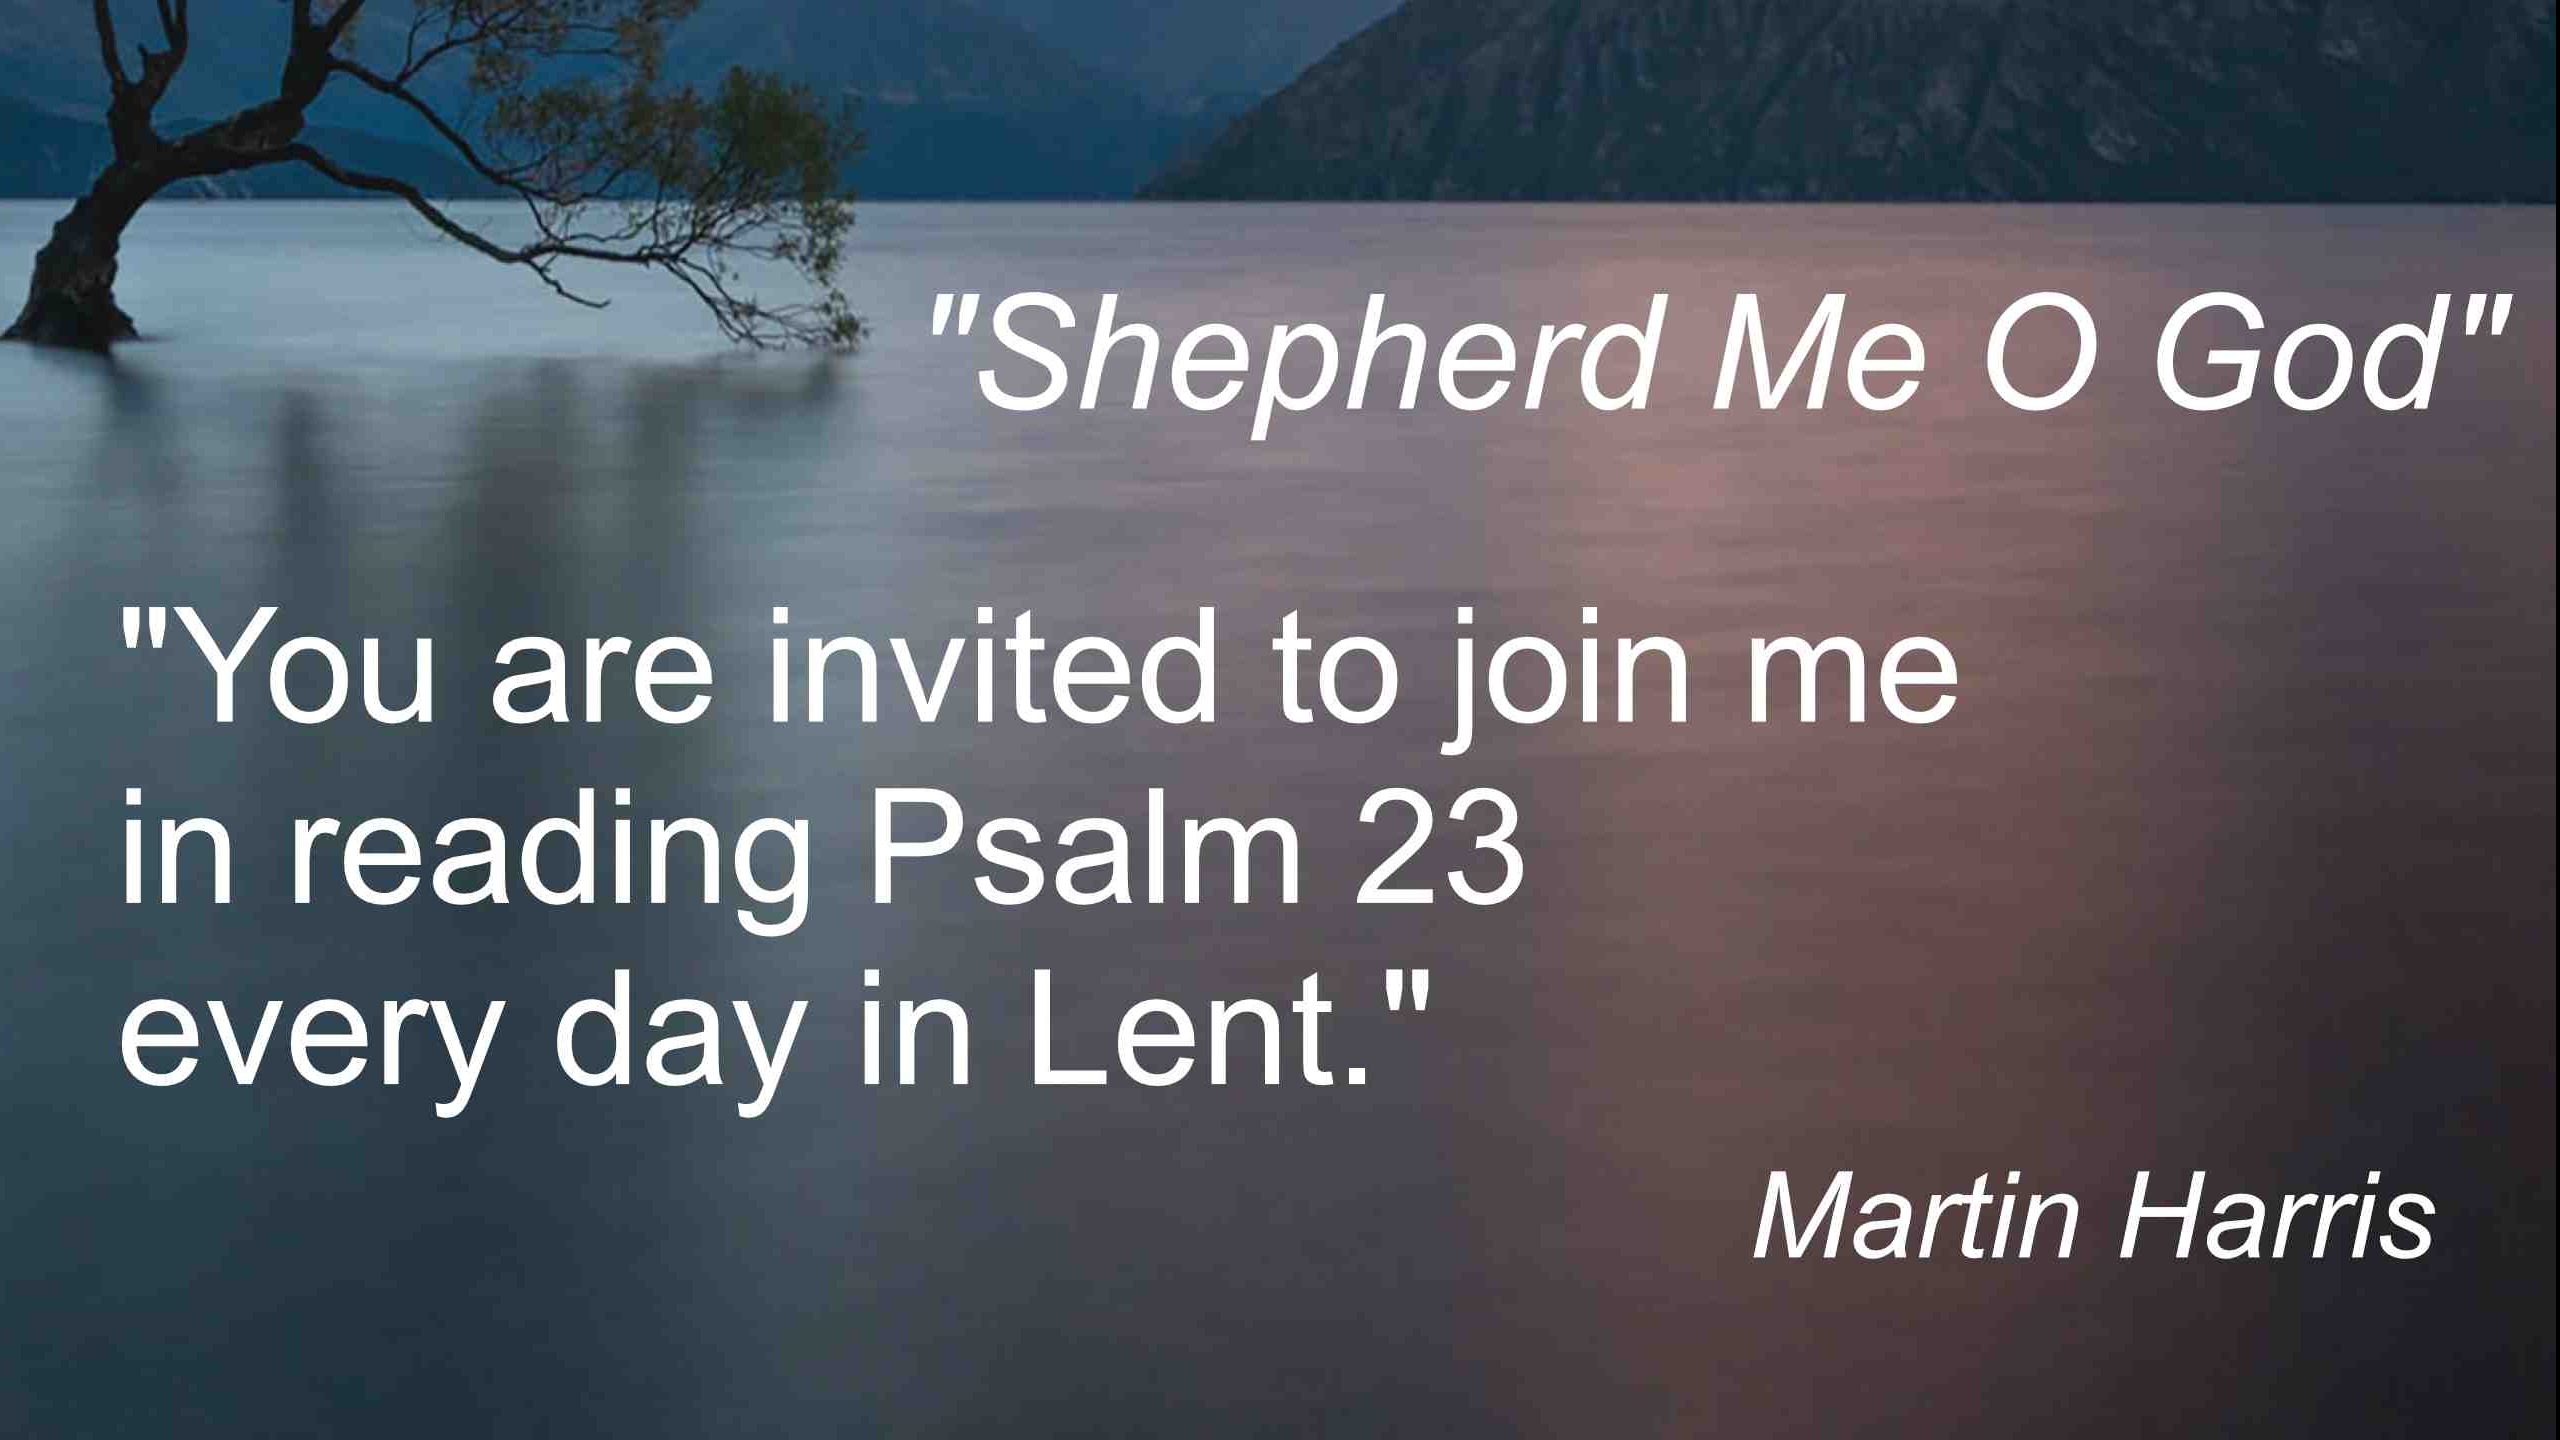 The Lord is our shepherd